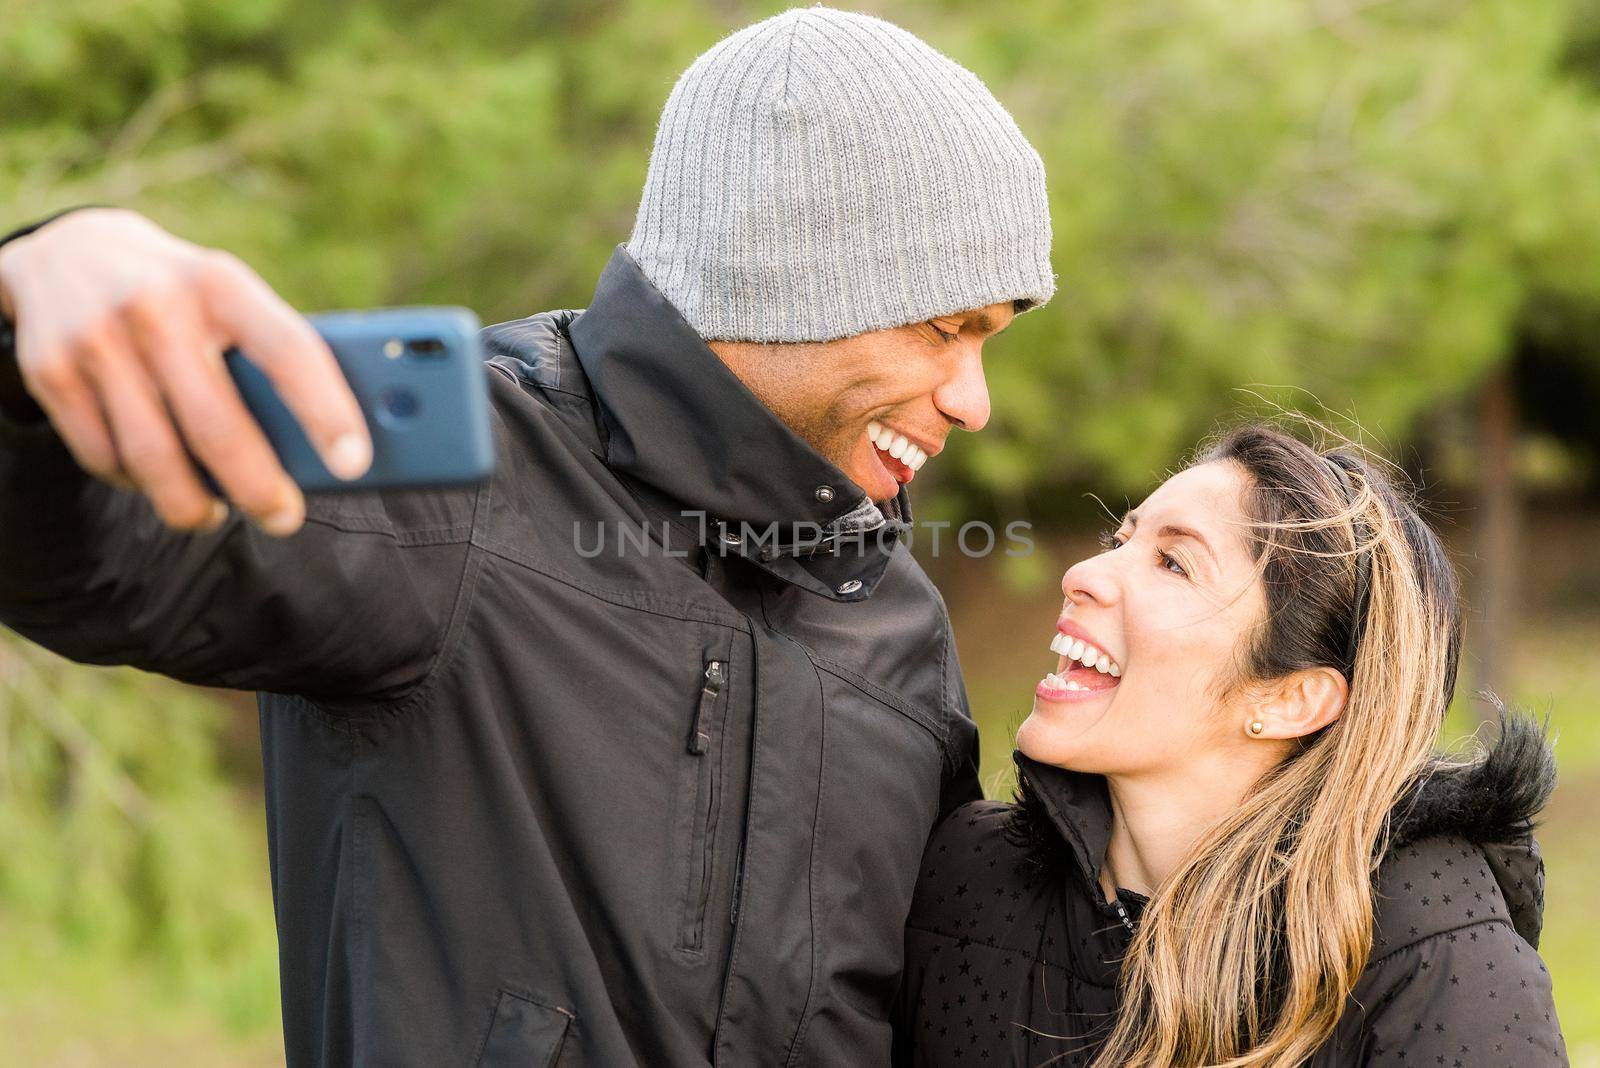 Fitness couple in warm clothes taking a selfie in the park looking at each other. Multi-ethnic couple outdoors.